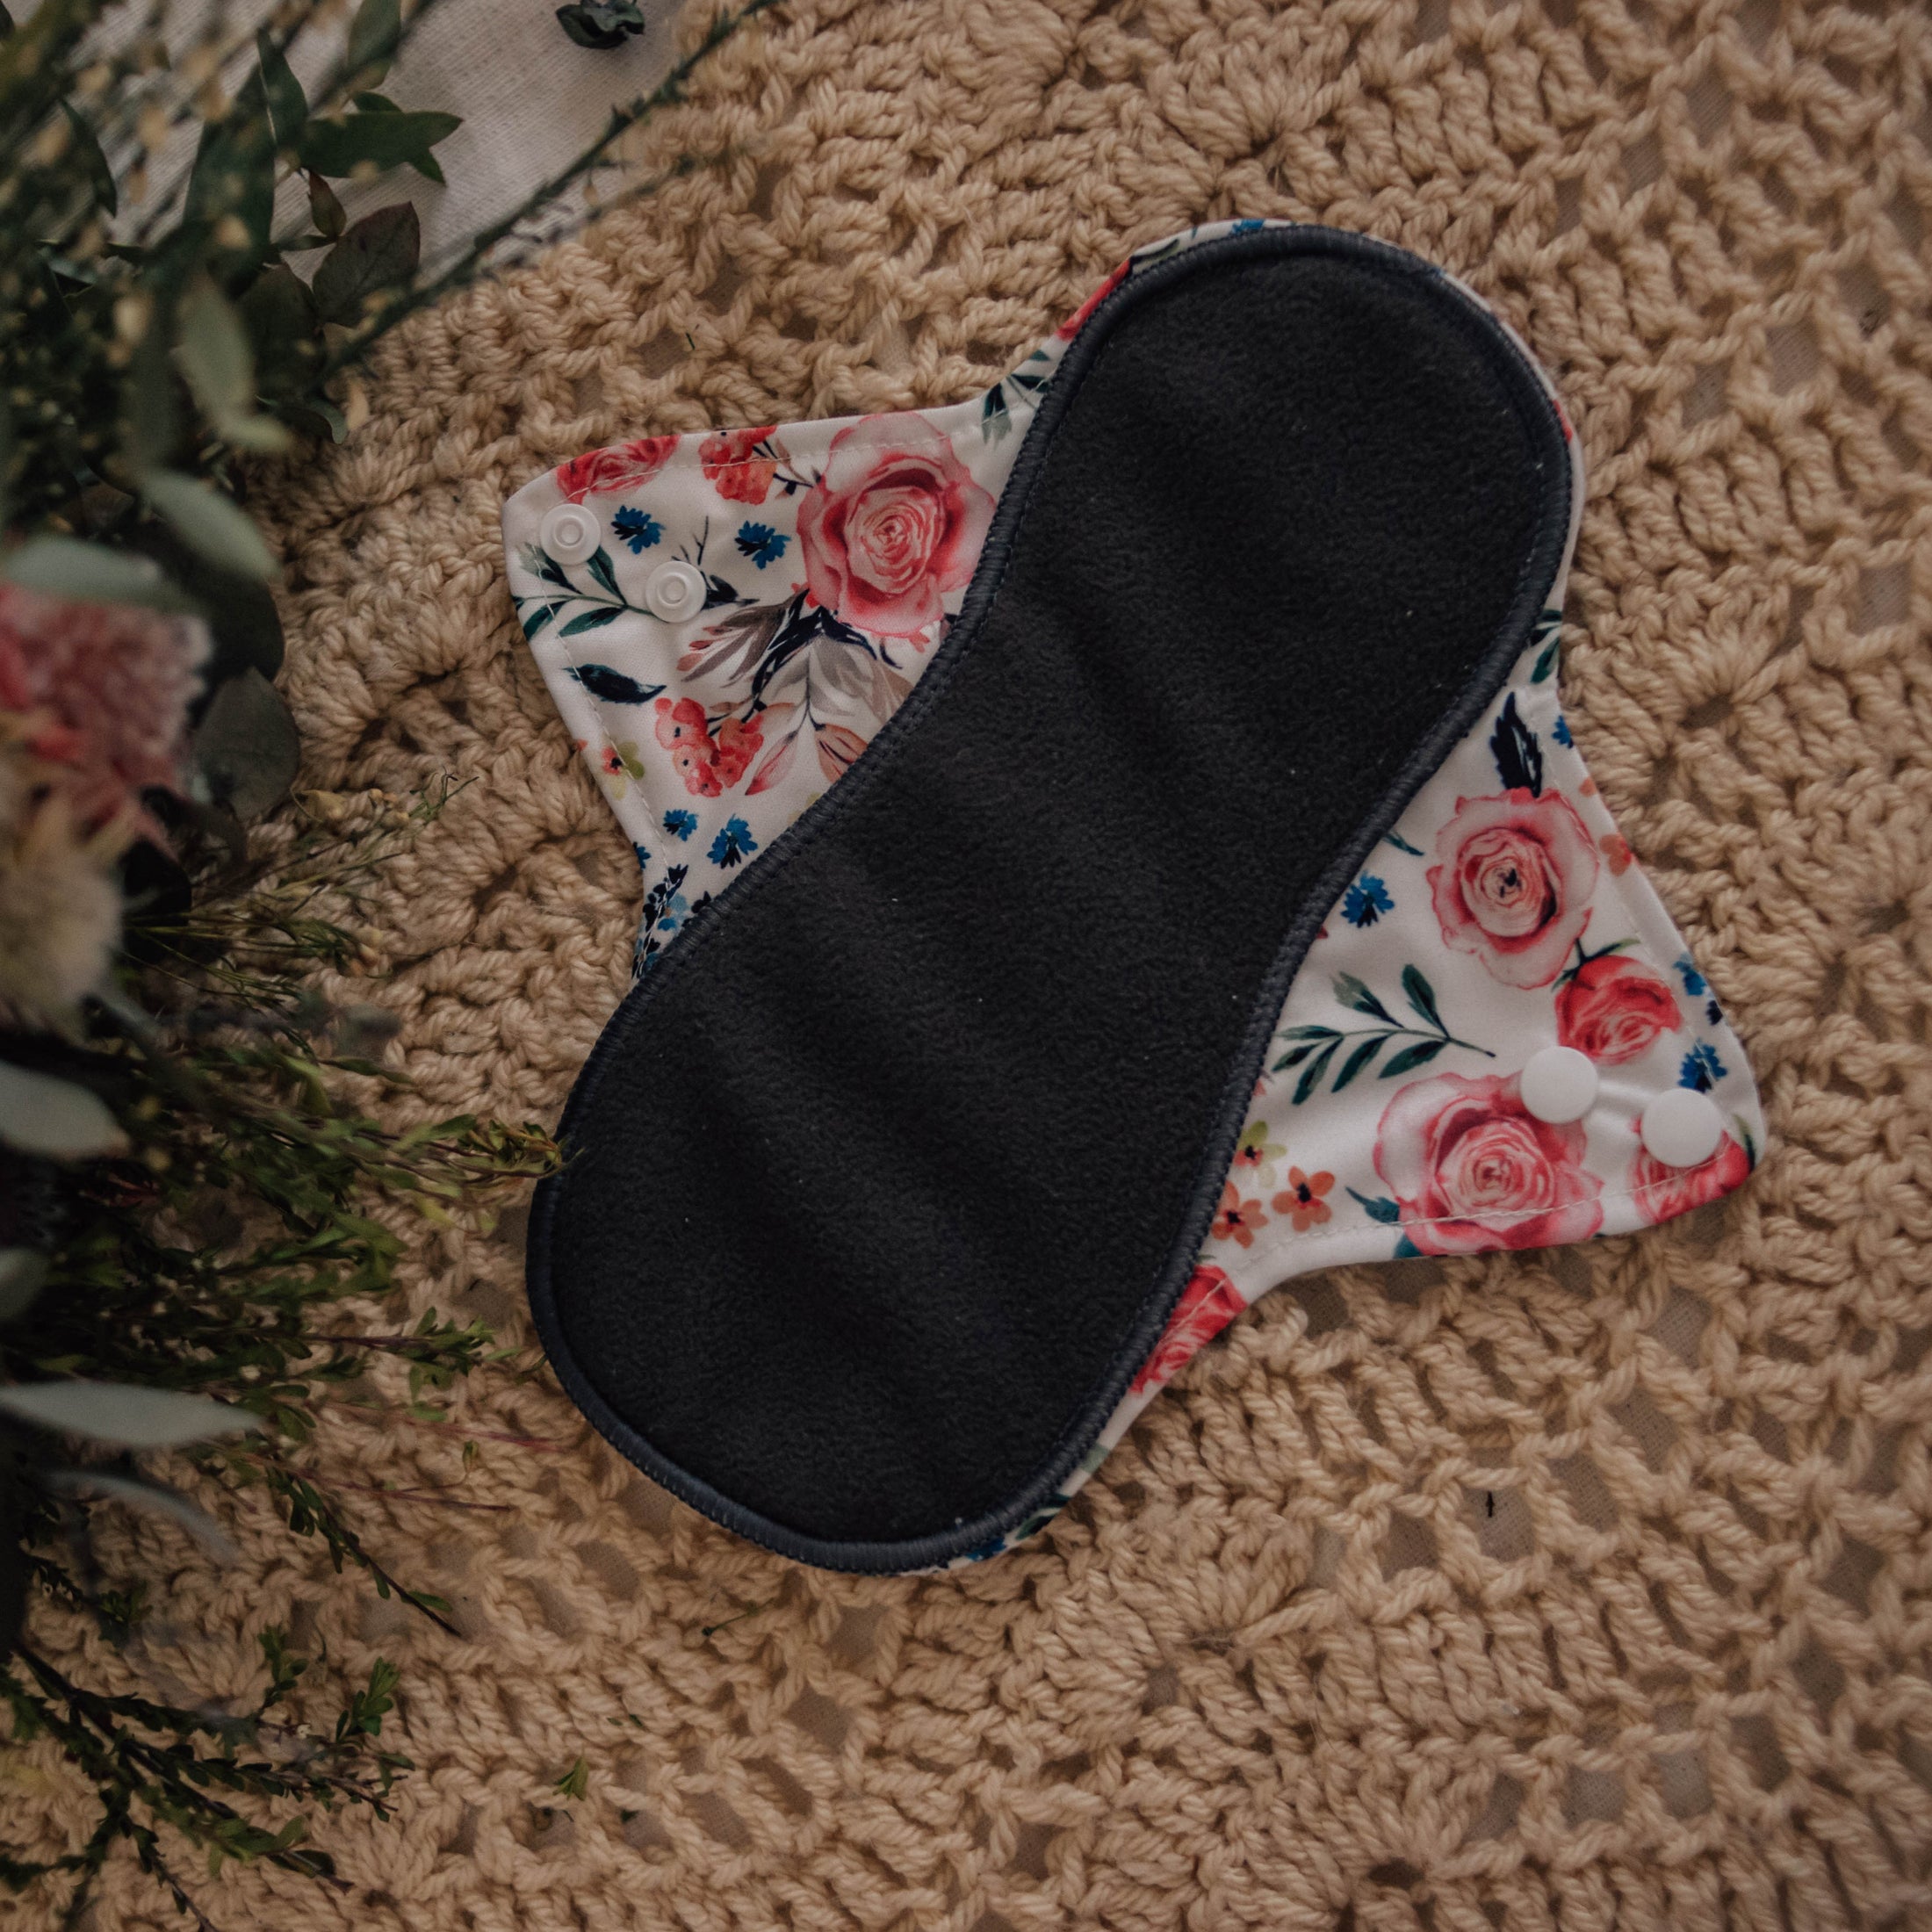 Floral Menstrual Pad. Reusable Menstrual Pad by My Little Gumnut. Cloth Pads Australia. Reusable period pads with bamboo charcoal inner layer.